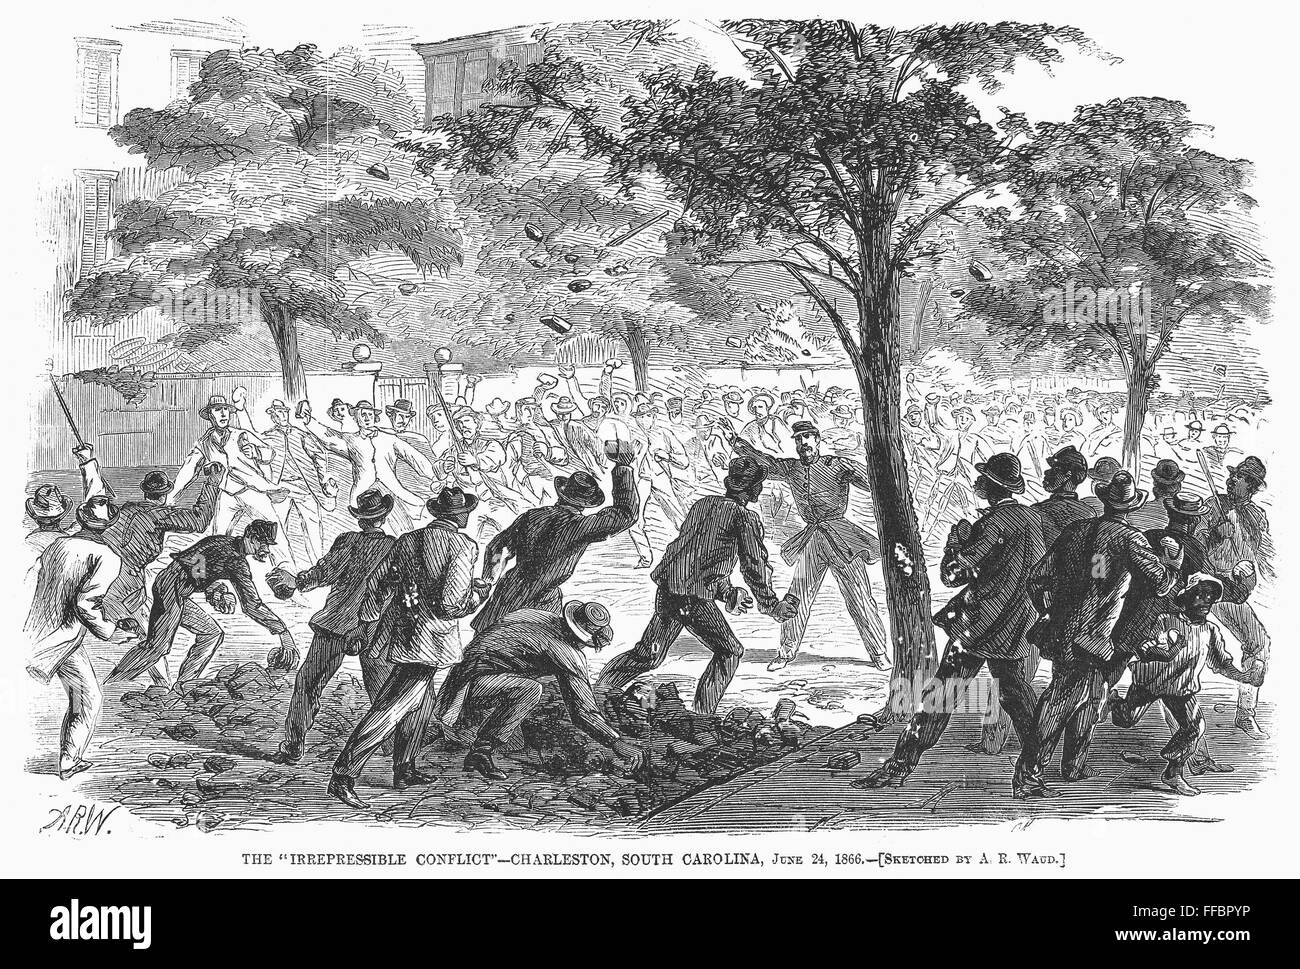 CHARLESTON: CONFLICT, 1866. /nA fight between black and white men in Charleston, South Carolina, after the end of the American Civil War. Wood engraving after A.R. Waud, June 1866. Stock Photo